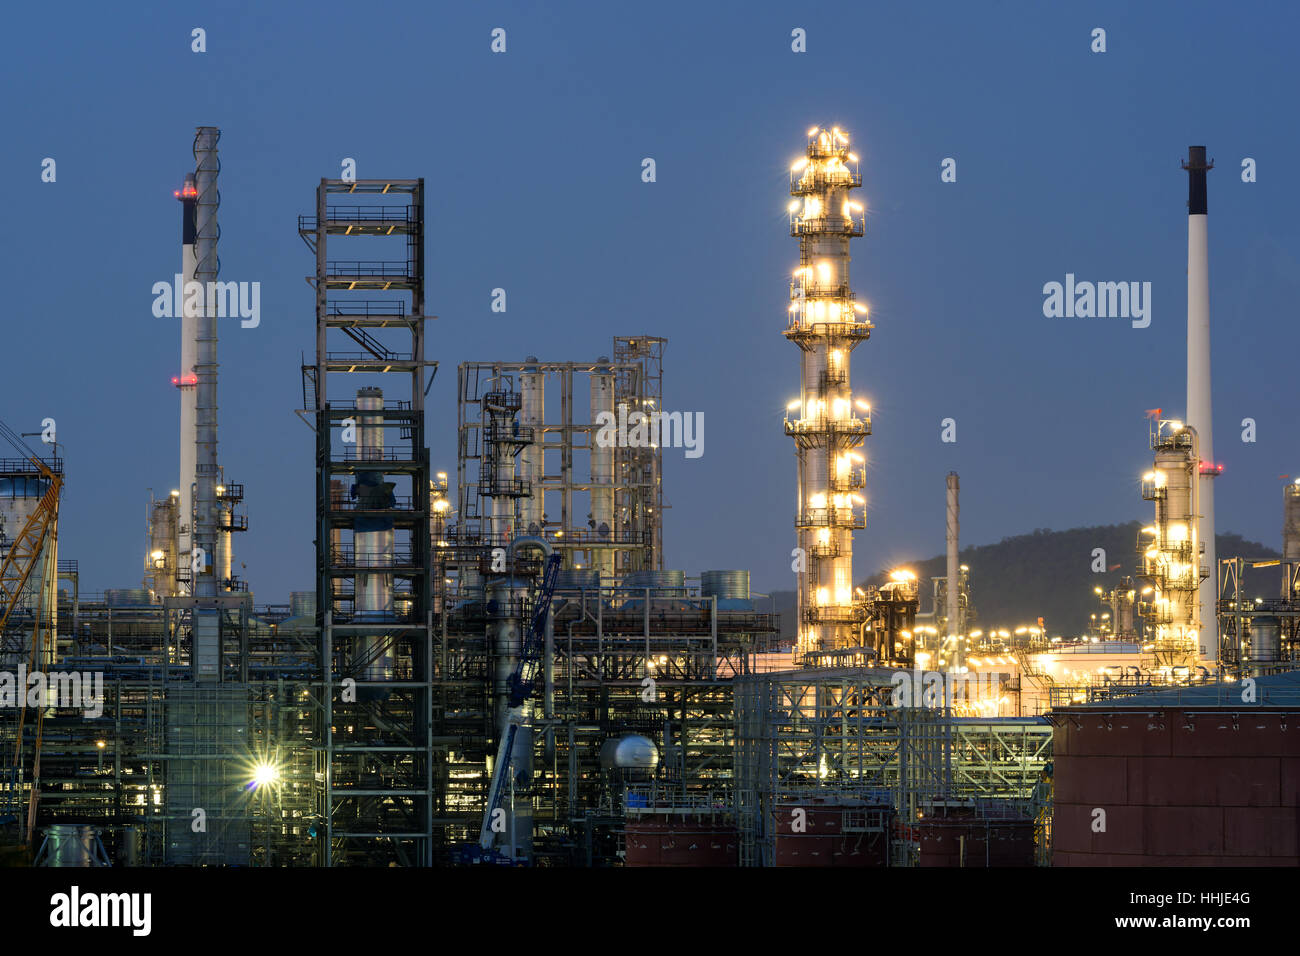 Oil refinery industry or petroleum industry with oil storage tank in Chonburi, Thailand. Stock Photo